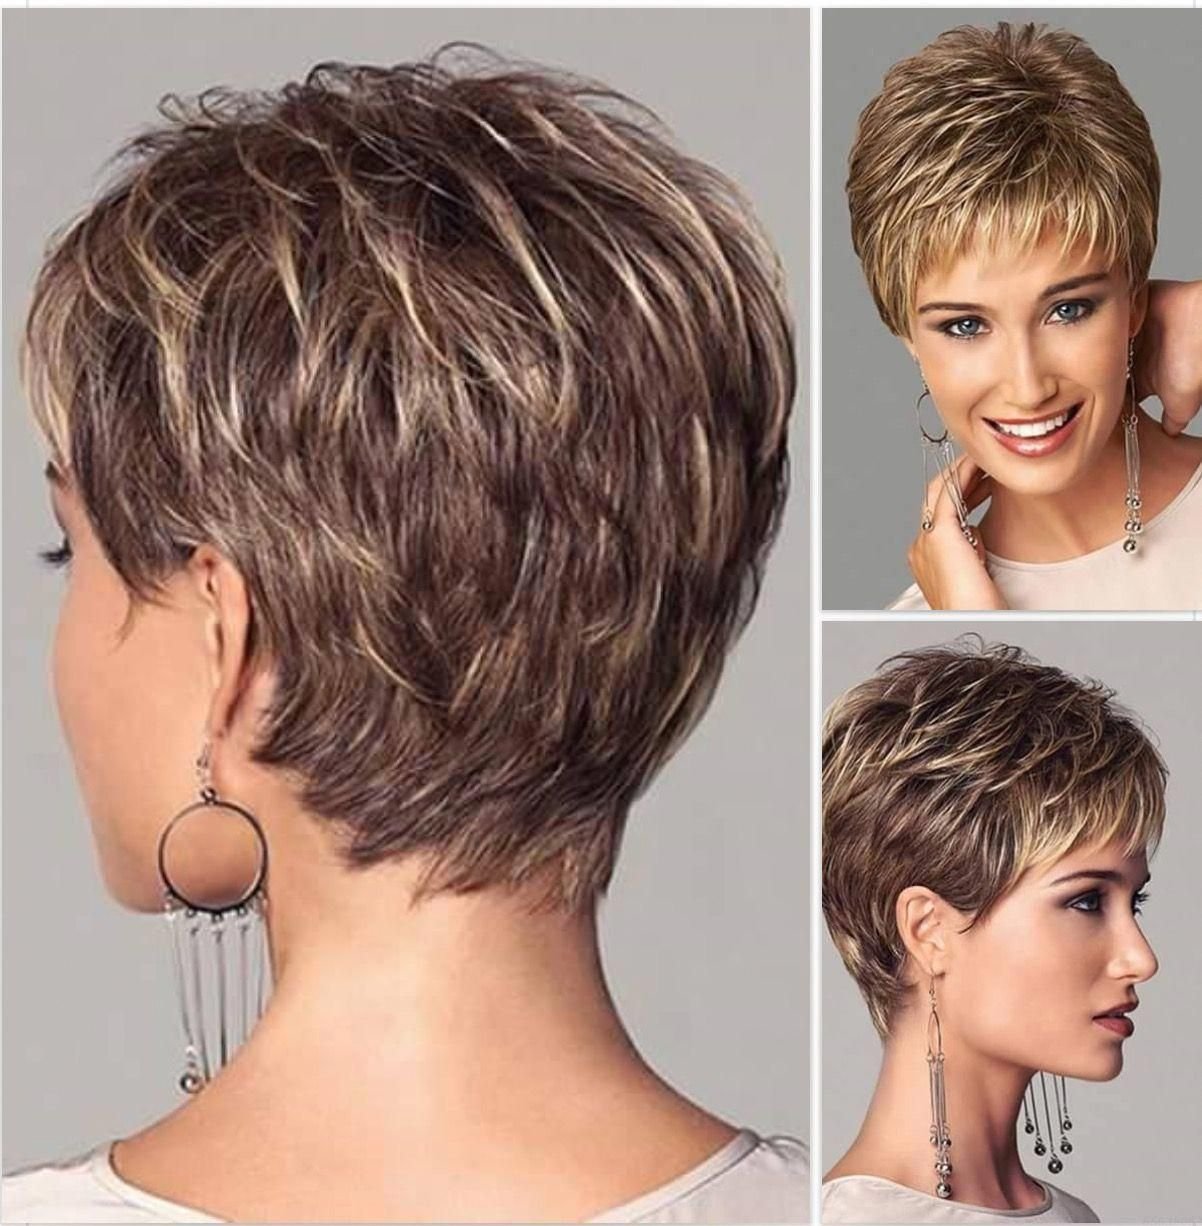 Very short pixie haircuts front and back view